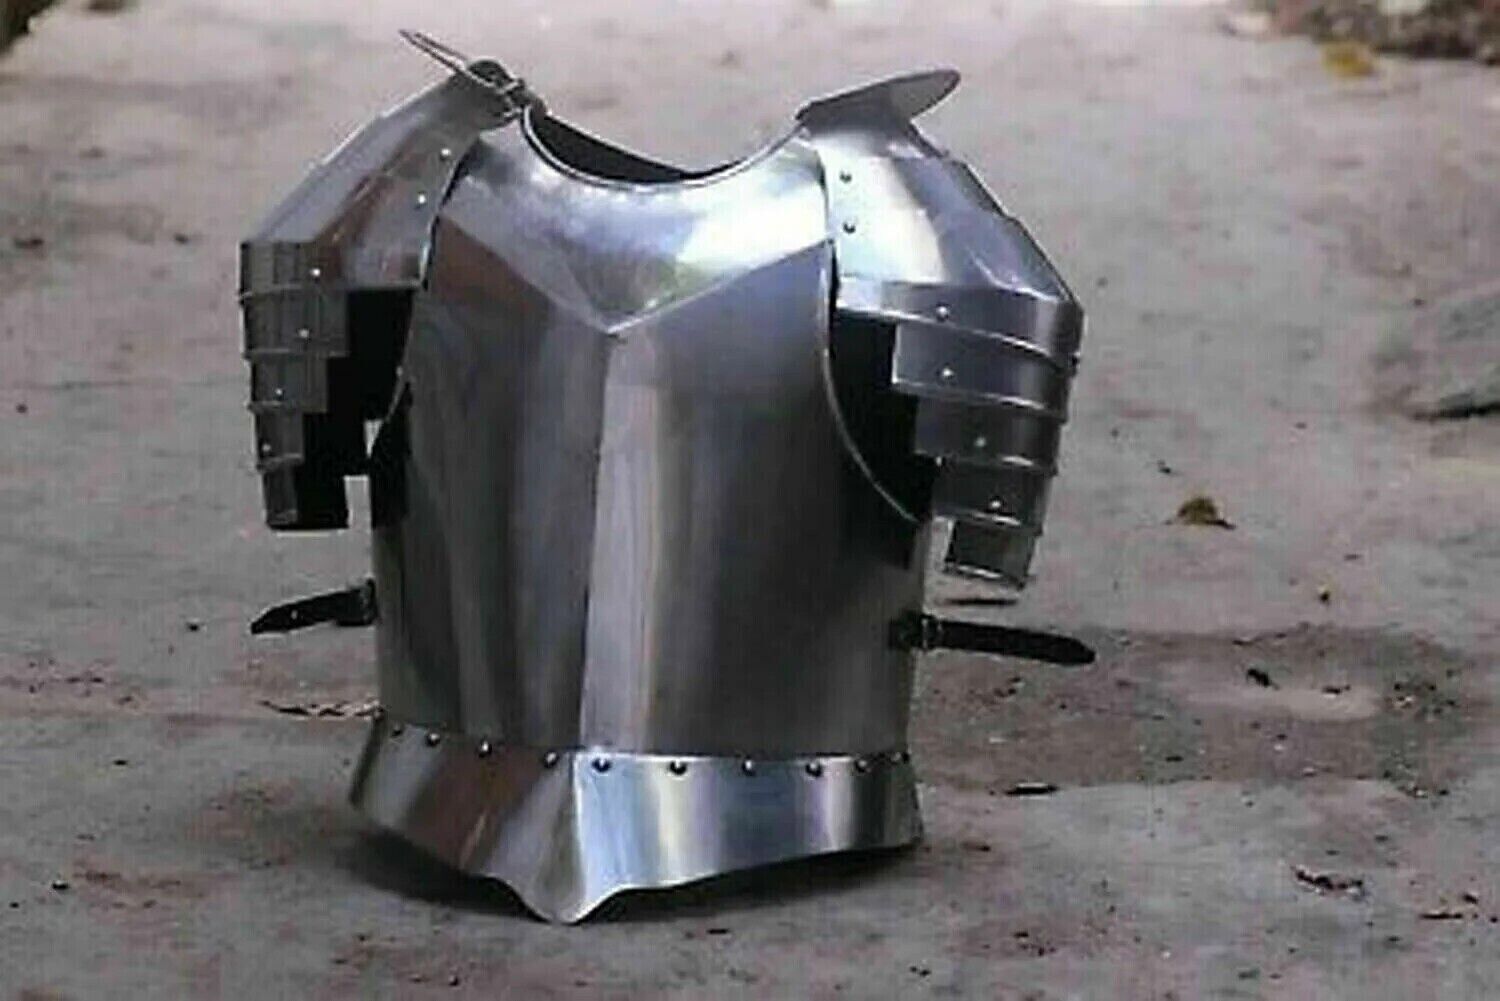 20gauge steel medieval knight armor cuirass with... LARP